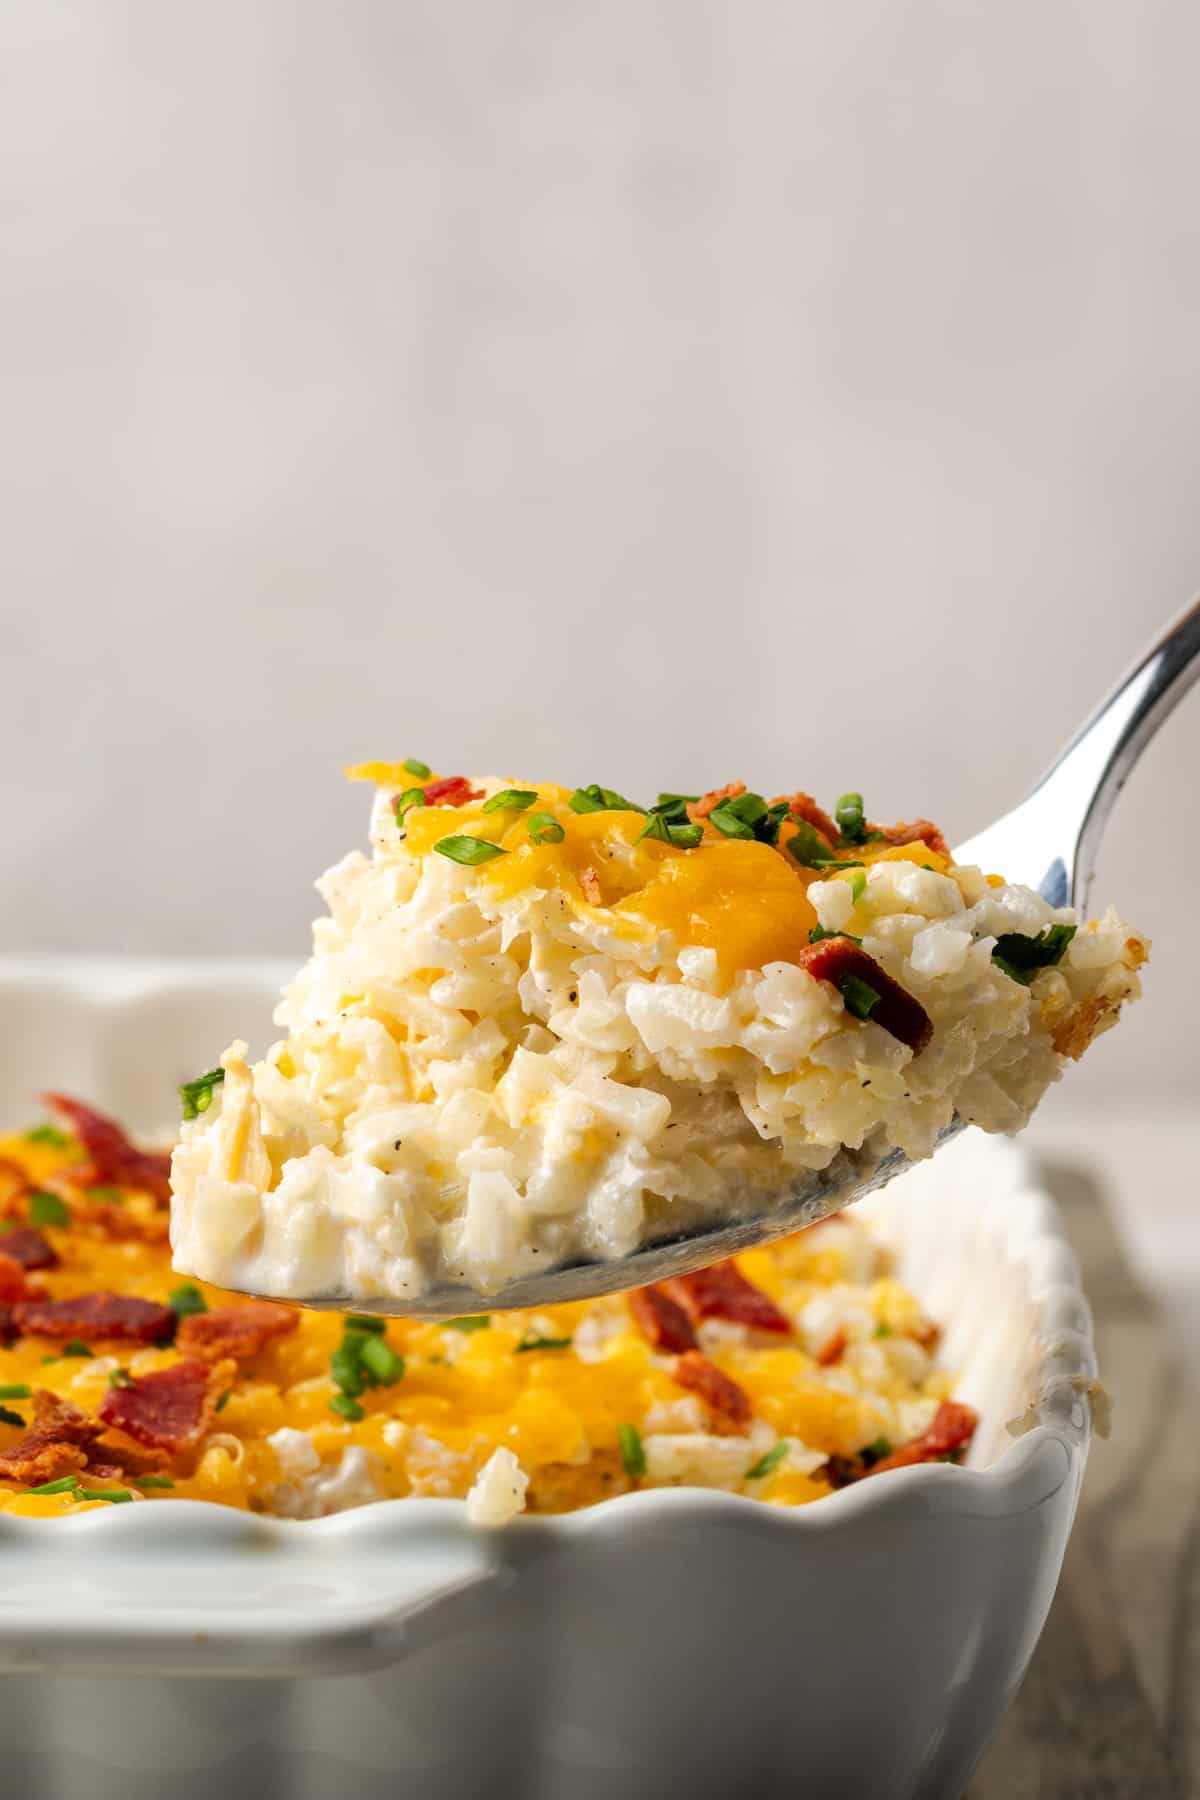 A spoon scooping up some baked cheesy cauliflower rice from a white casserole dish.